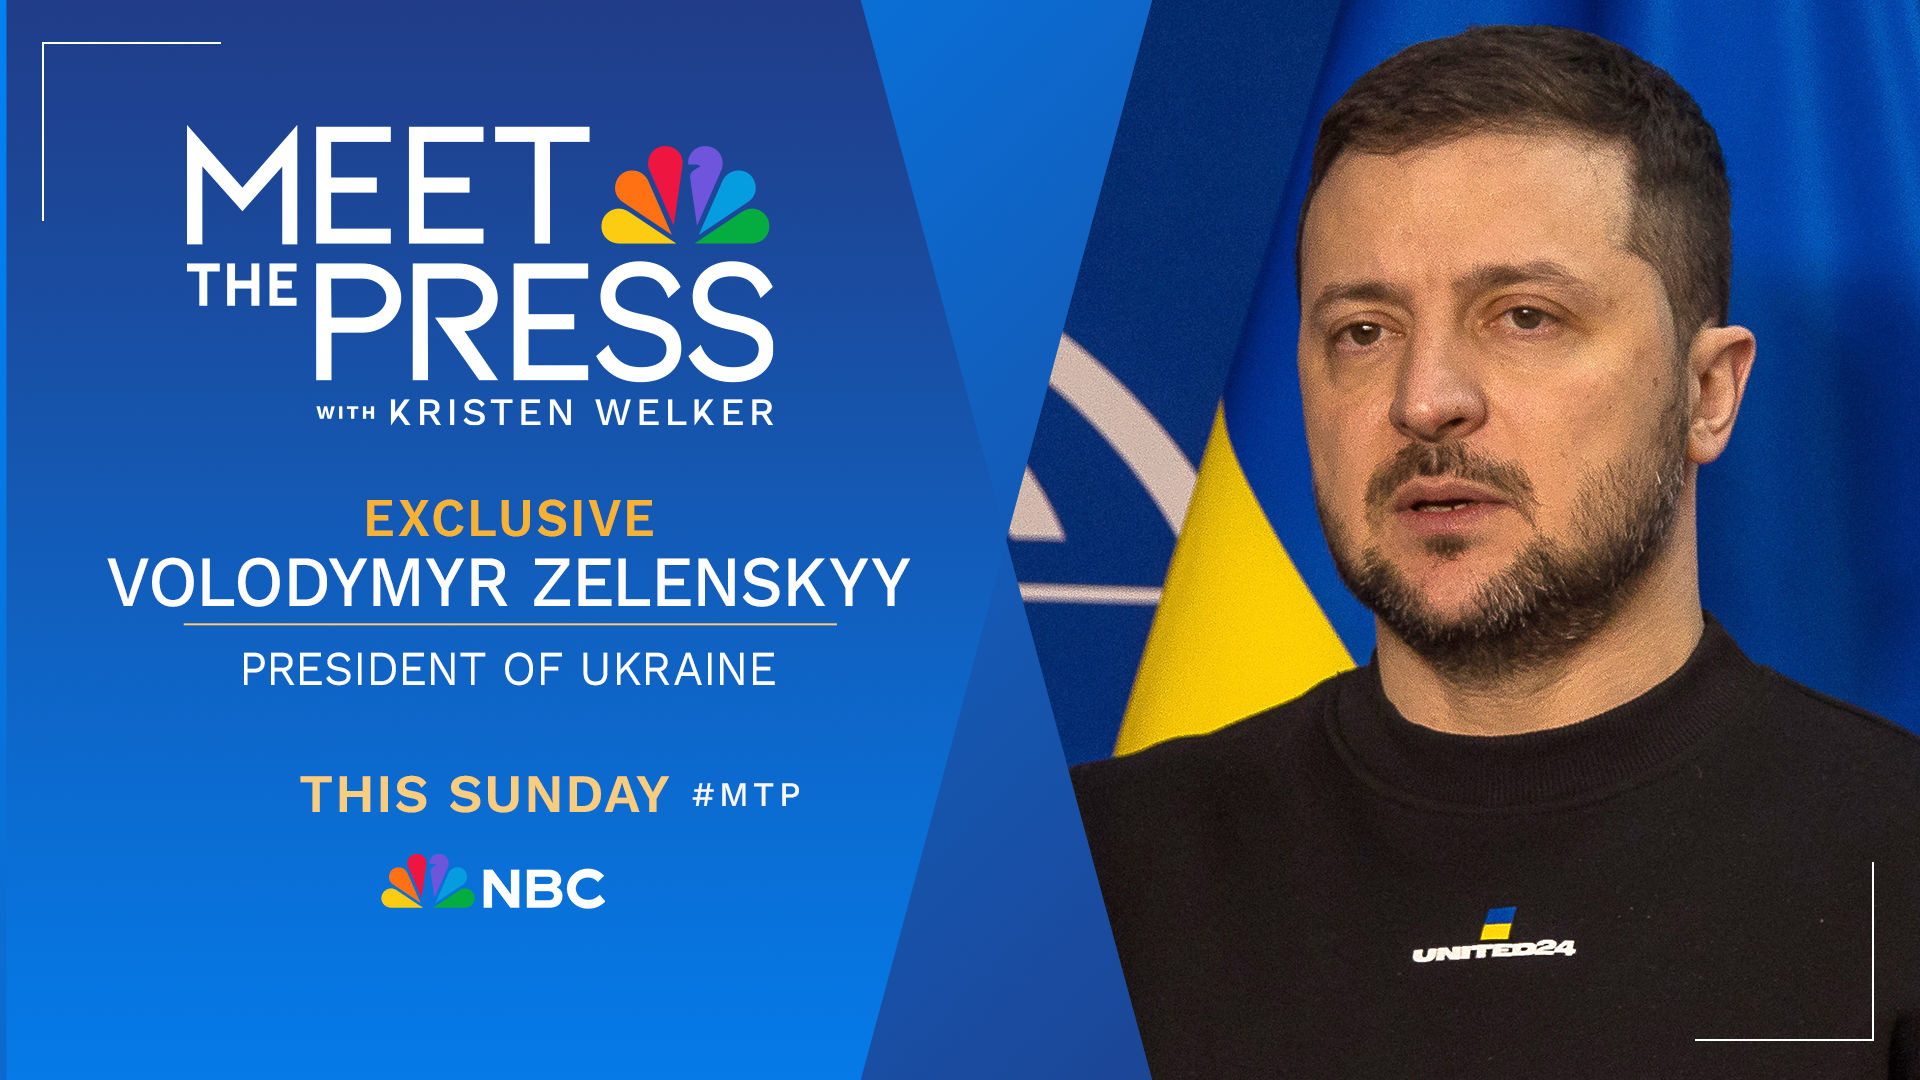 EXCLUSIVE INTERVIEW WITH UKRAINIAN PRESIDENT VOLODYMYR ZELENSKYY ON “MEET THE PRESS WITH KRISTEN WELKER” THIS SUNDAY